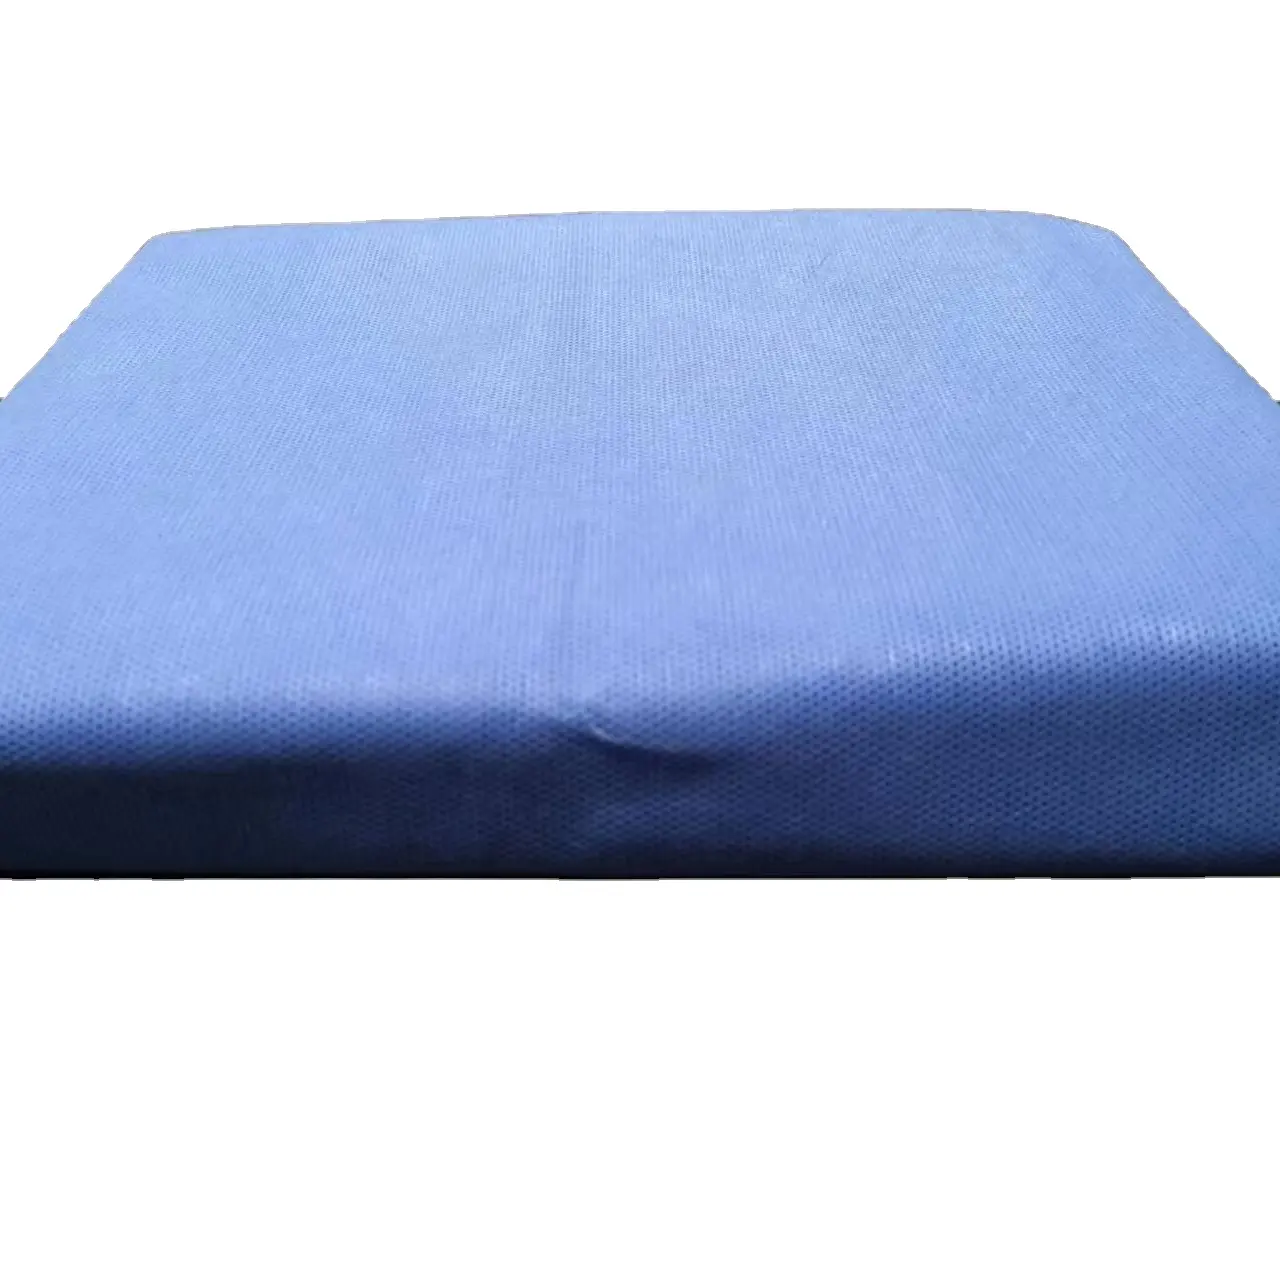 Disposable Medical Bed Cover Blue Style Sterile Surgical Drape Bed Cover Non Woven Fabric Pad Sheet